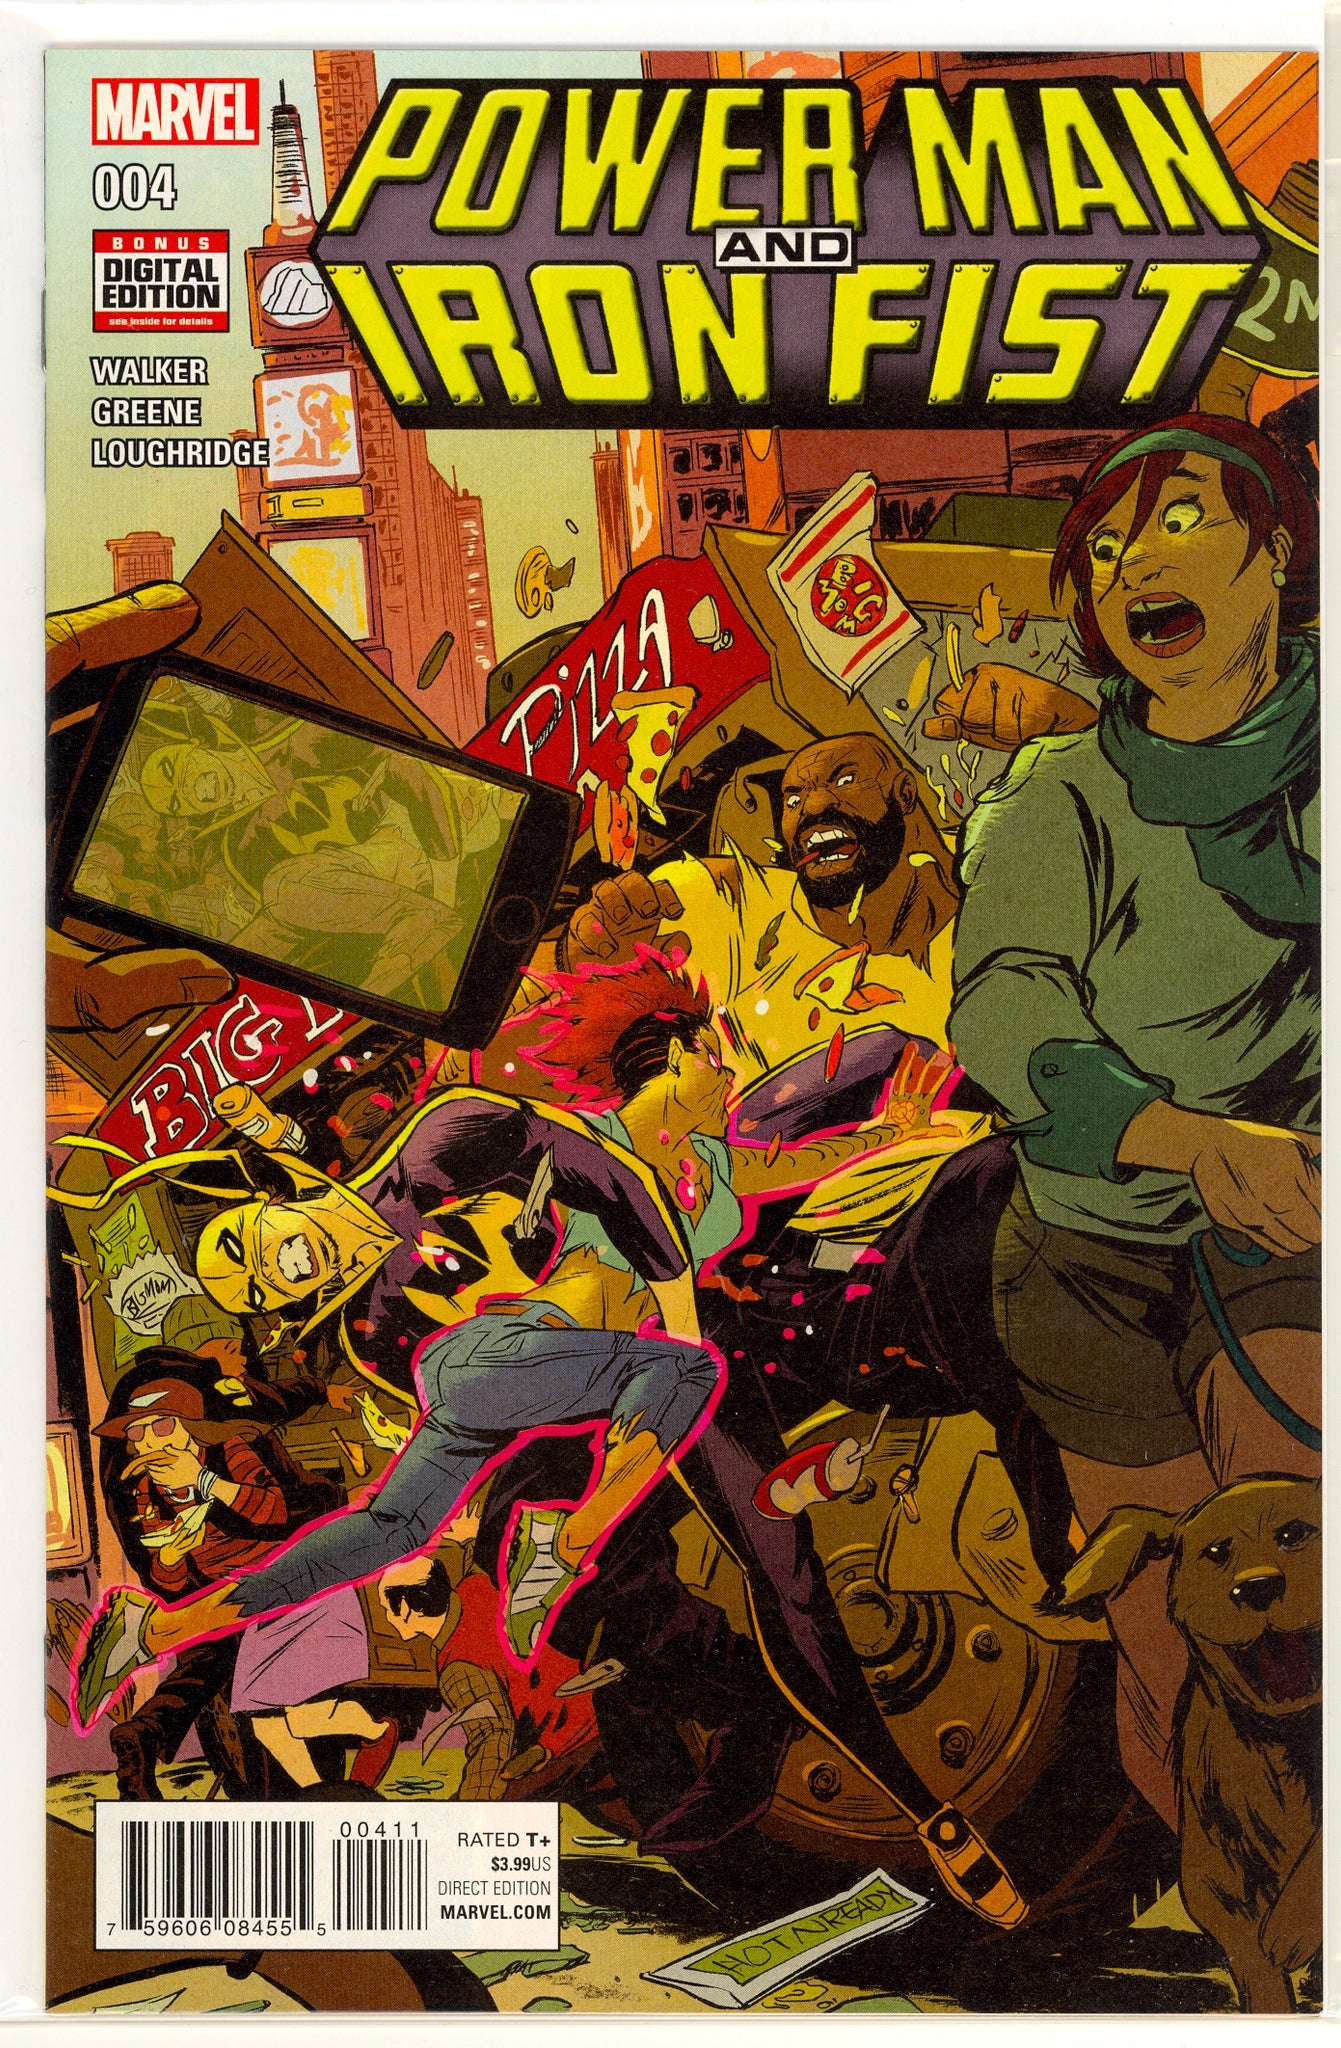 Power Man and Iron Fist #4 (2016)